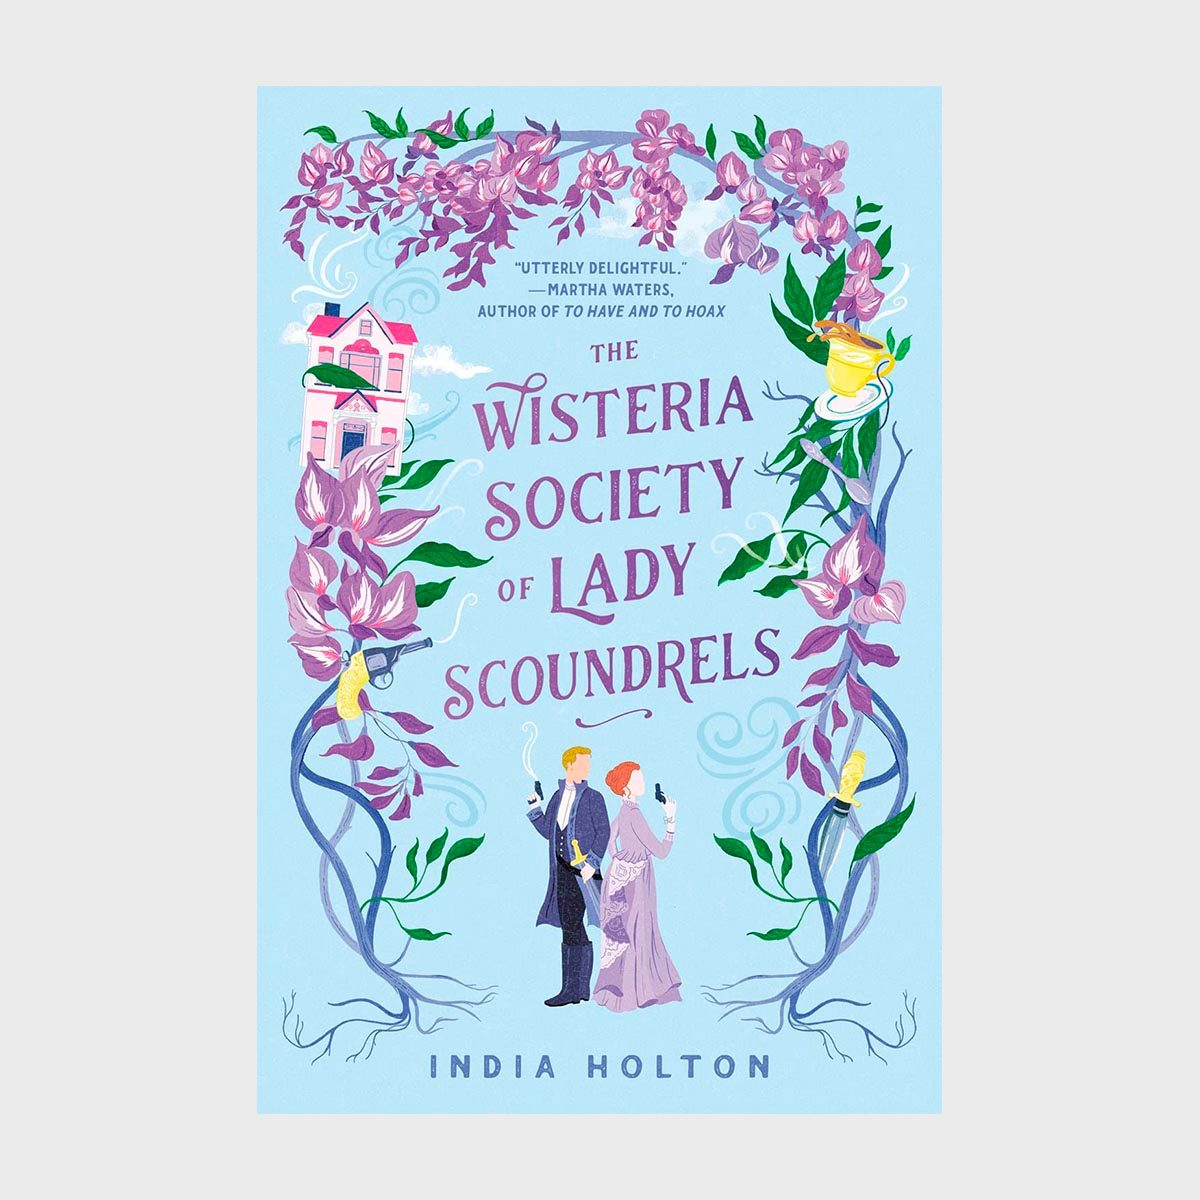 70 Of The Funniest Books Of All Time6 The Wisteria Society Of Lady Scoundrels